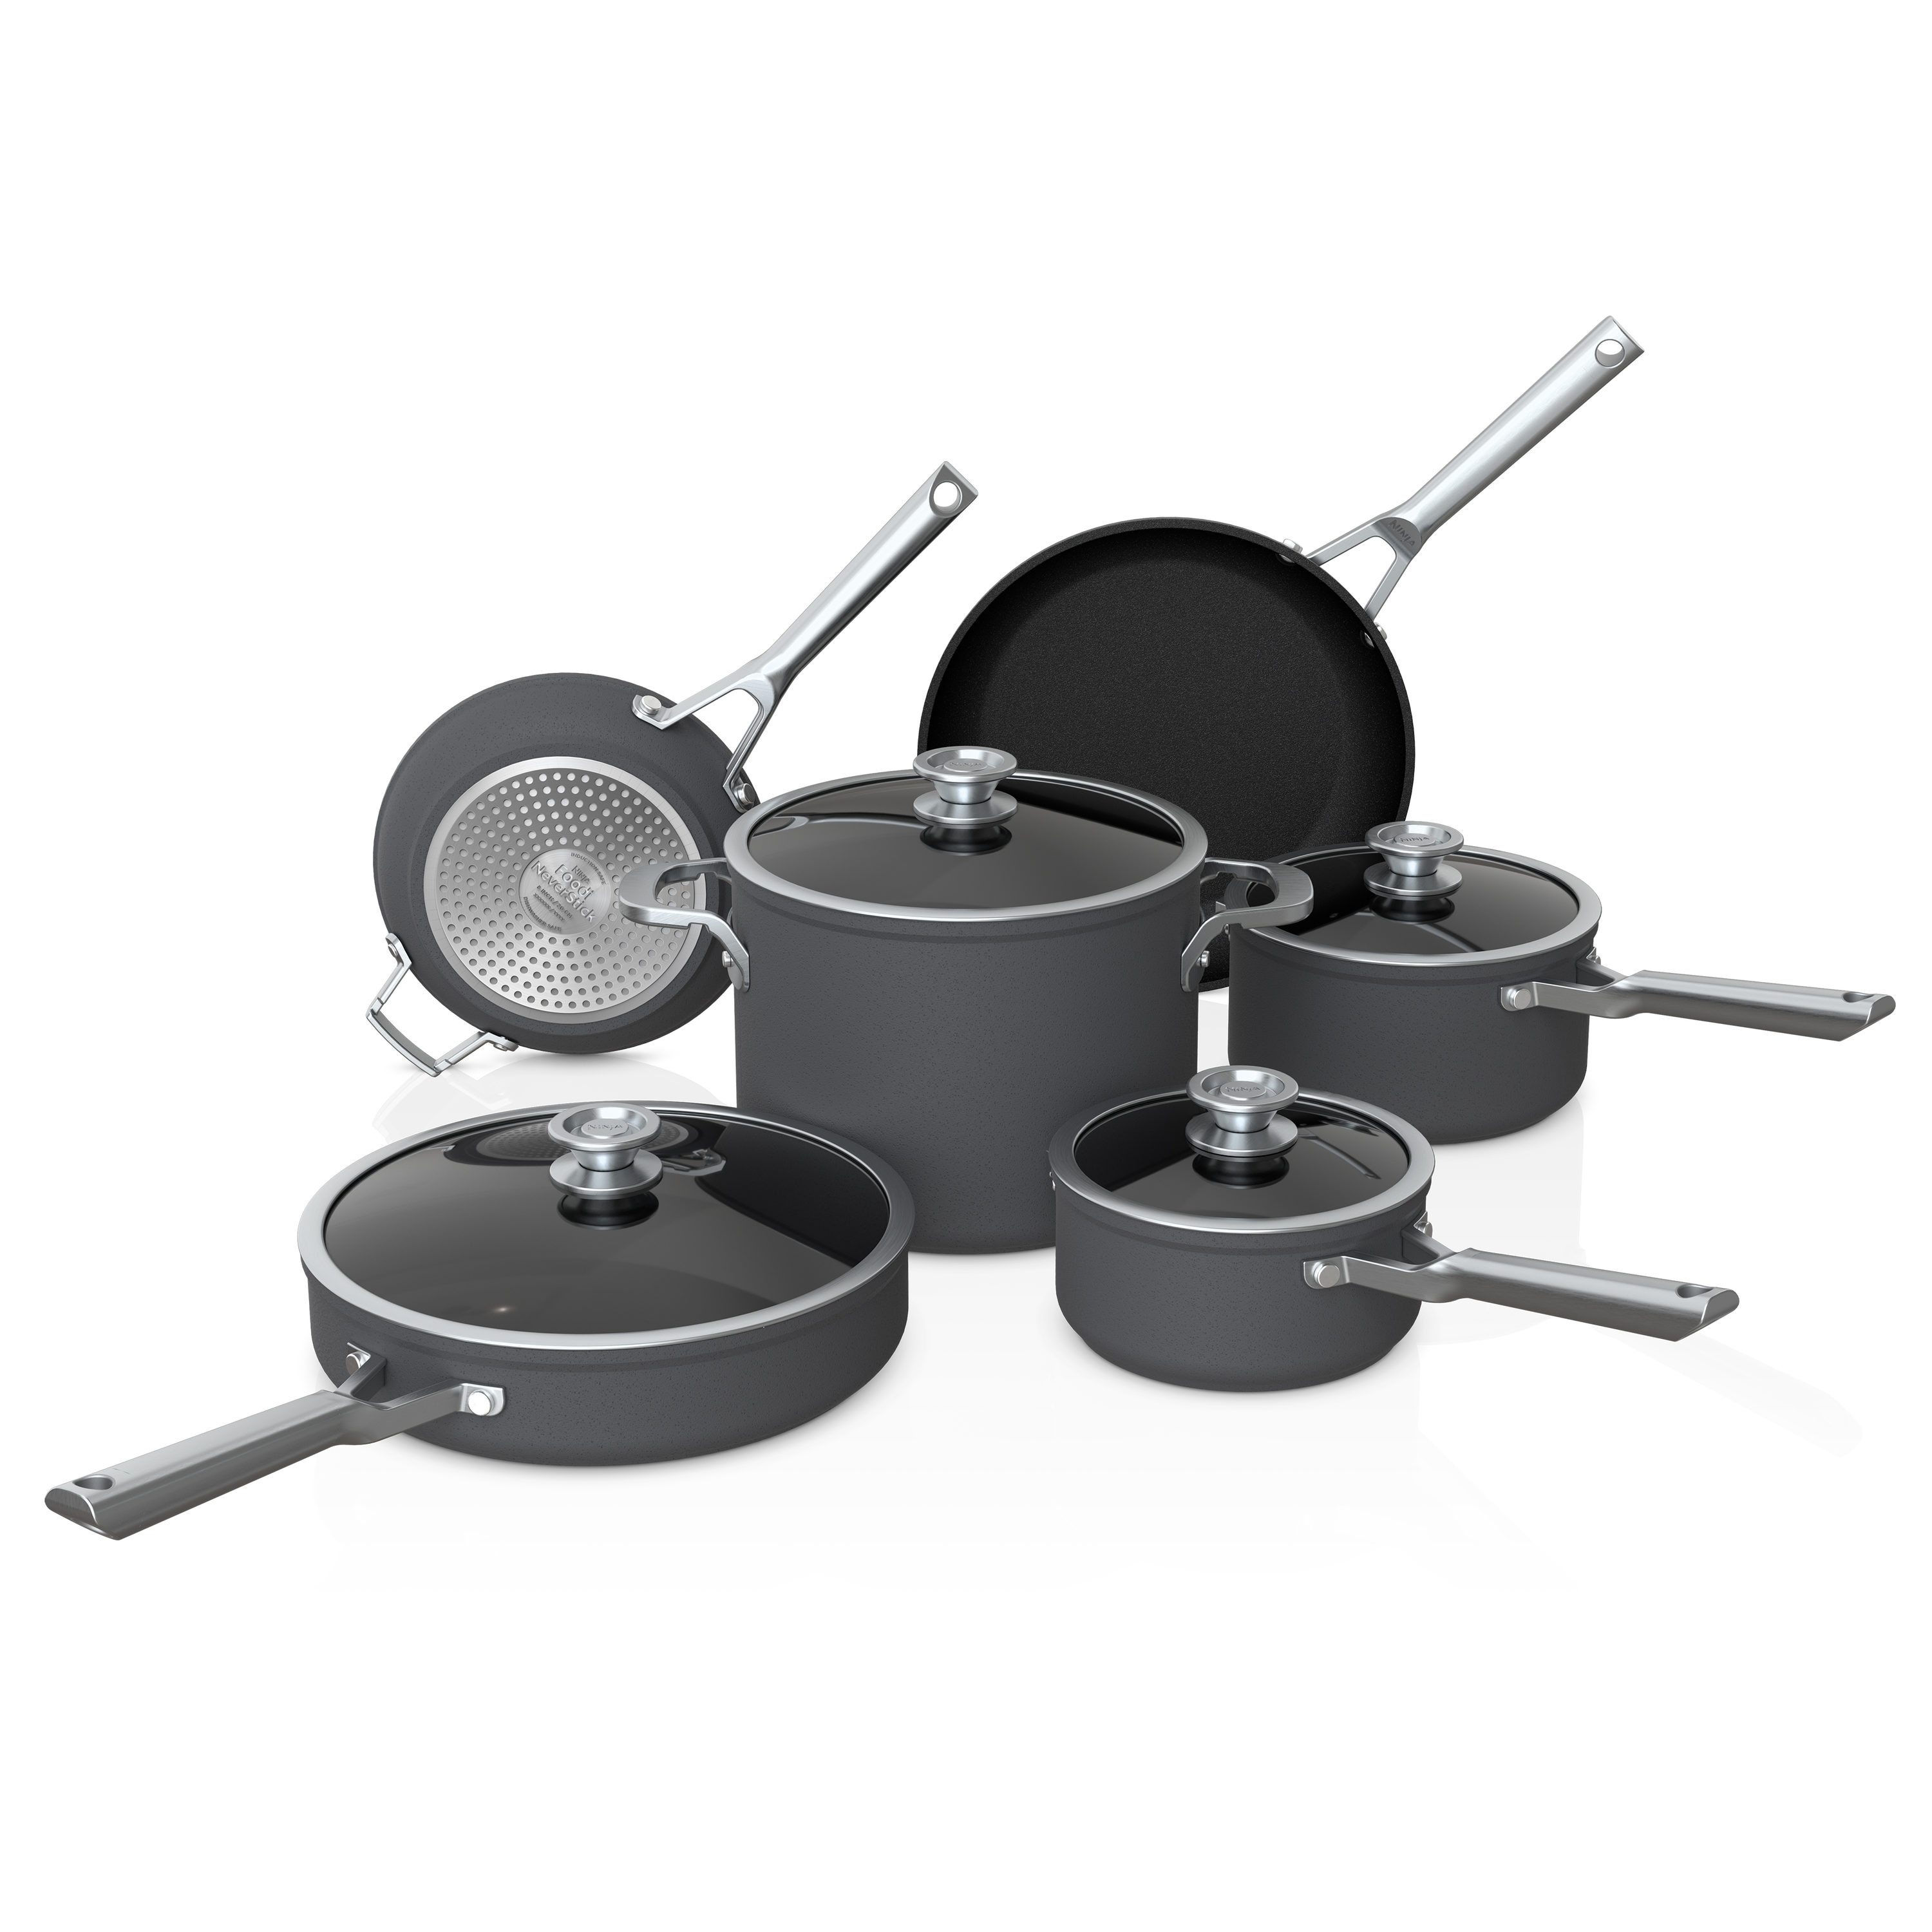 Ceramic & Stainless Steel Cookware are almost here 😍 - Ninja Kitchen